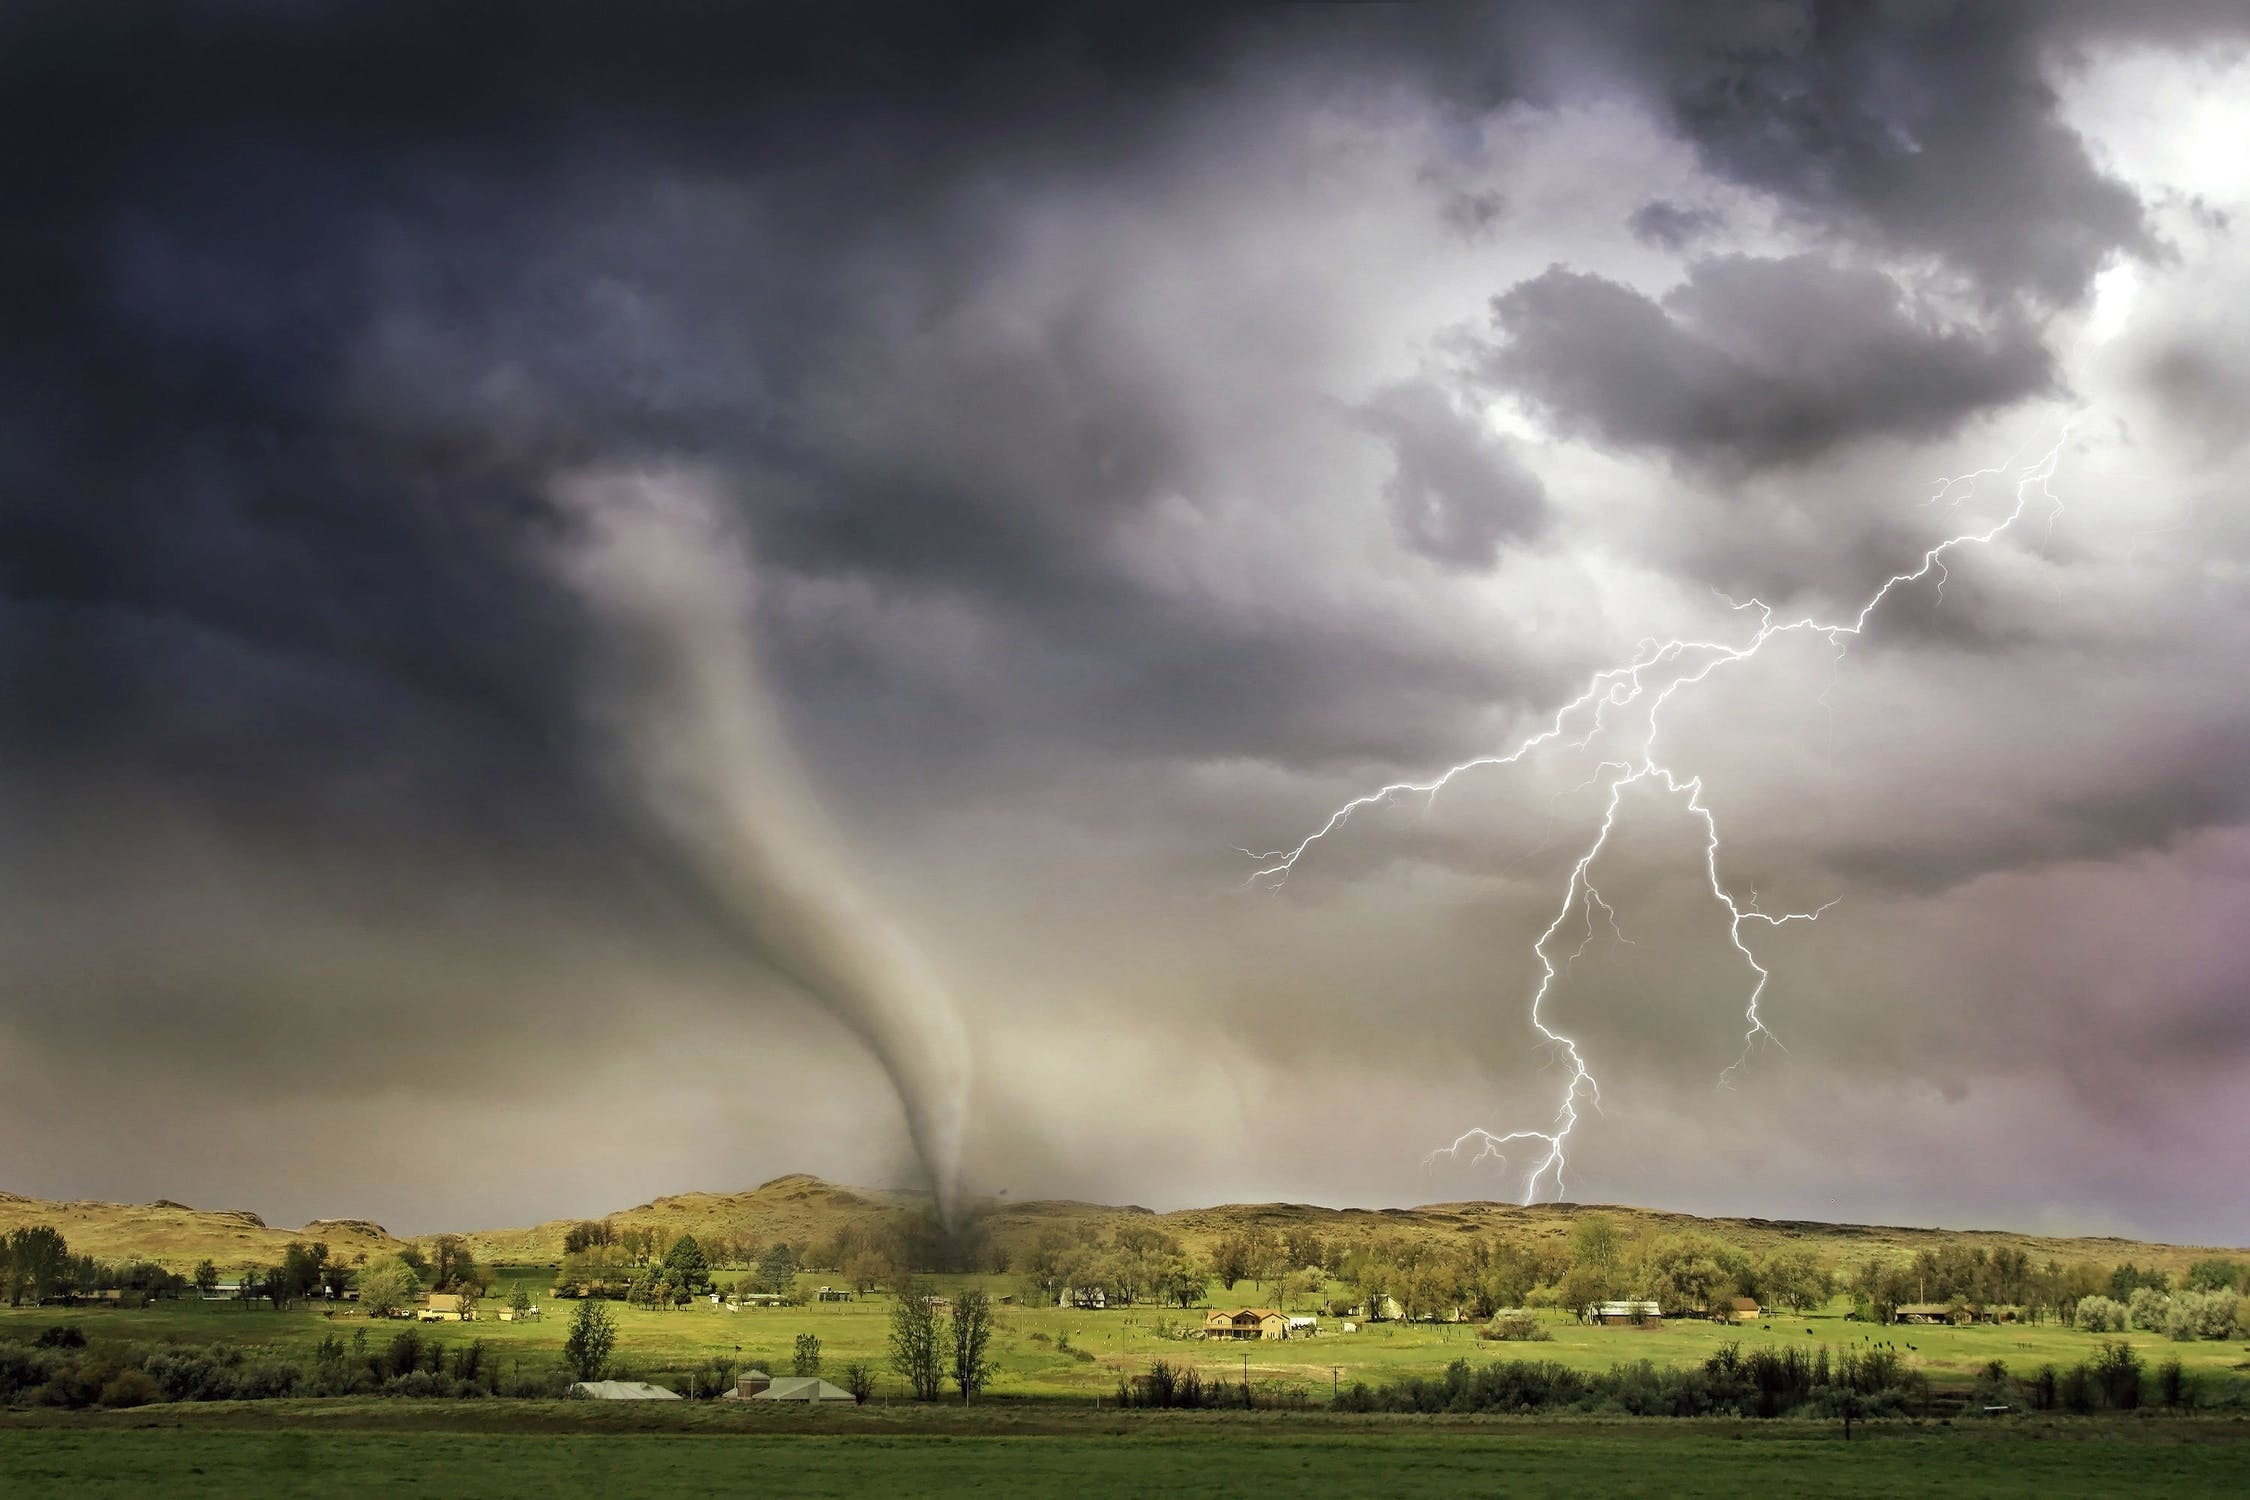 Tornados can exceed wind speeds of 200 mph.